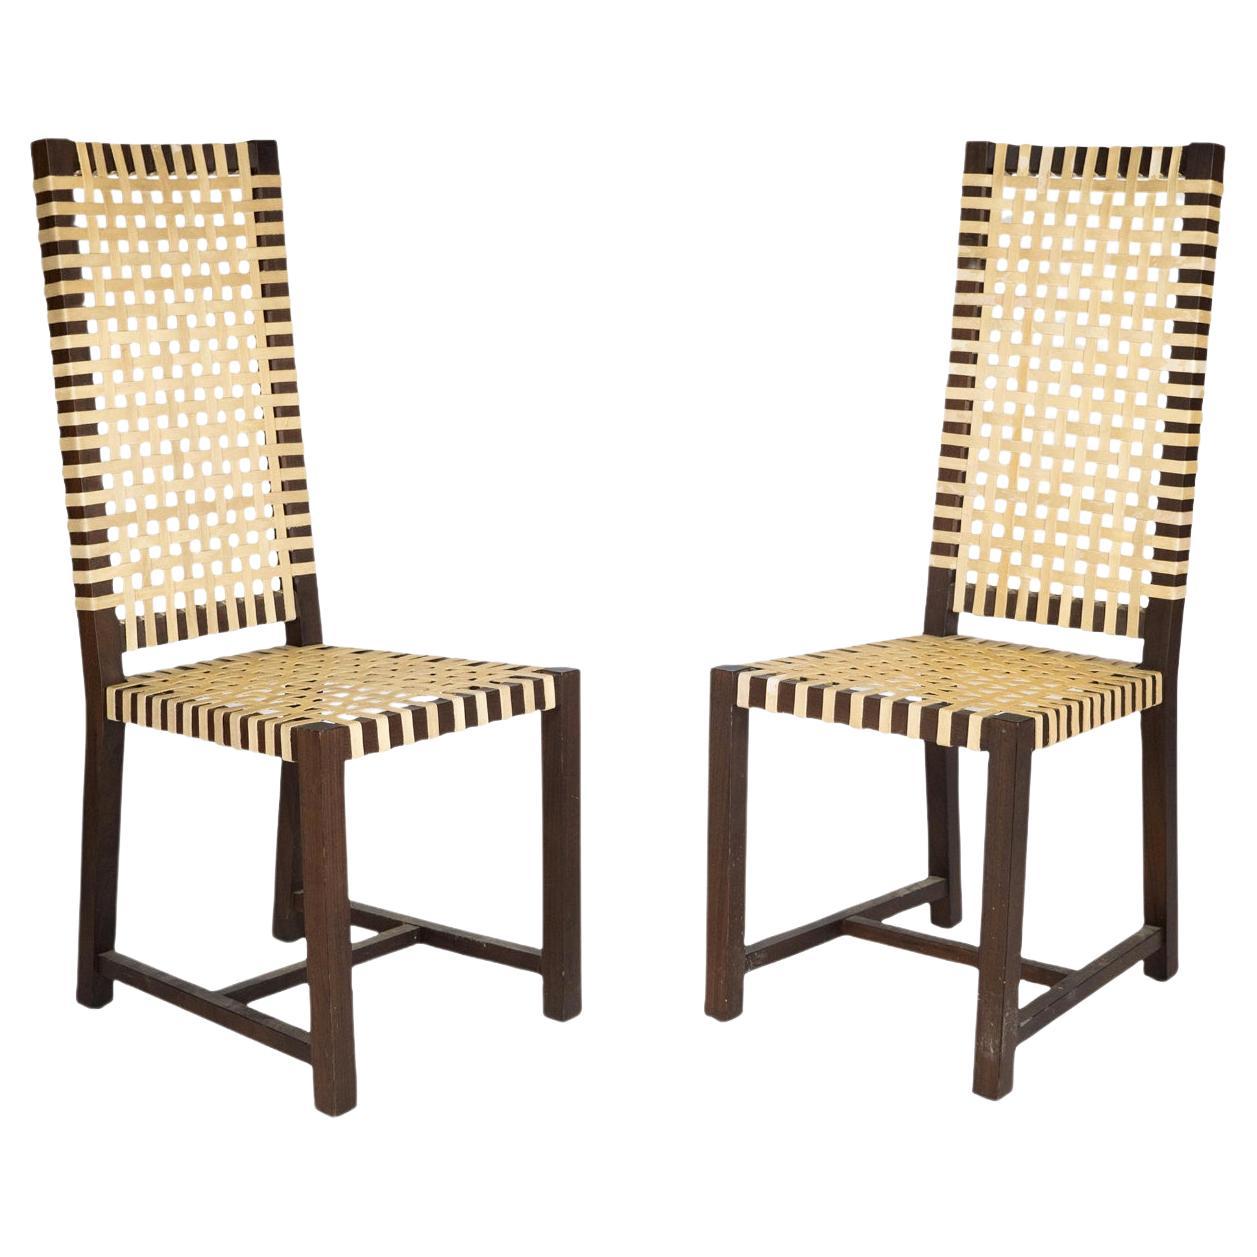 1980s Italian Architectural Otto 121' High Back Chairs by Paola Navone for Gerva For Sale